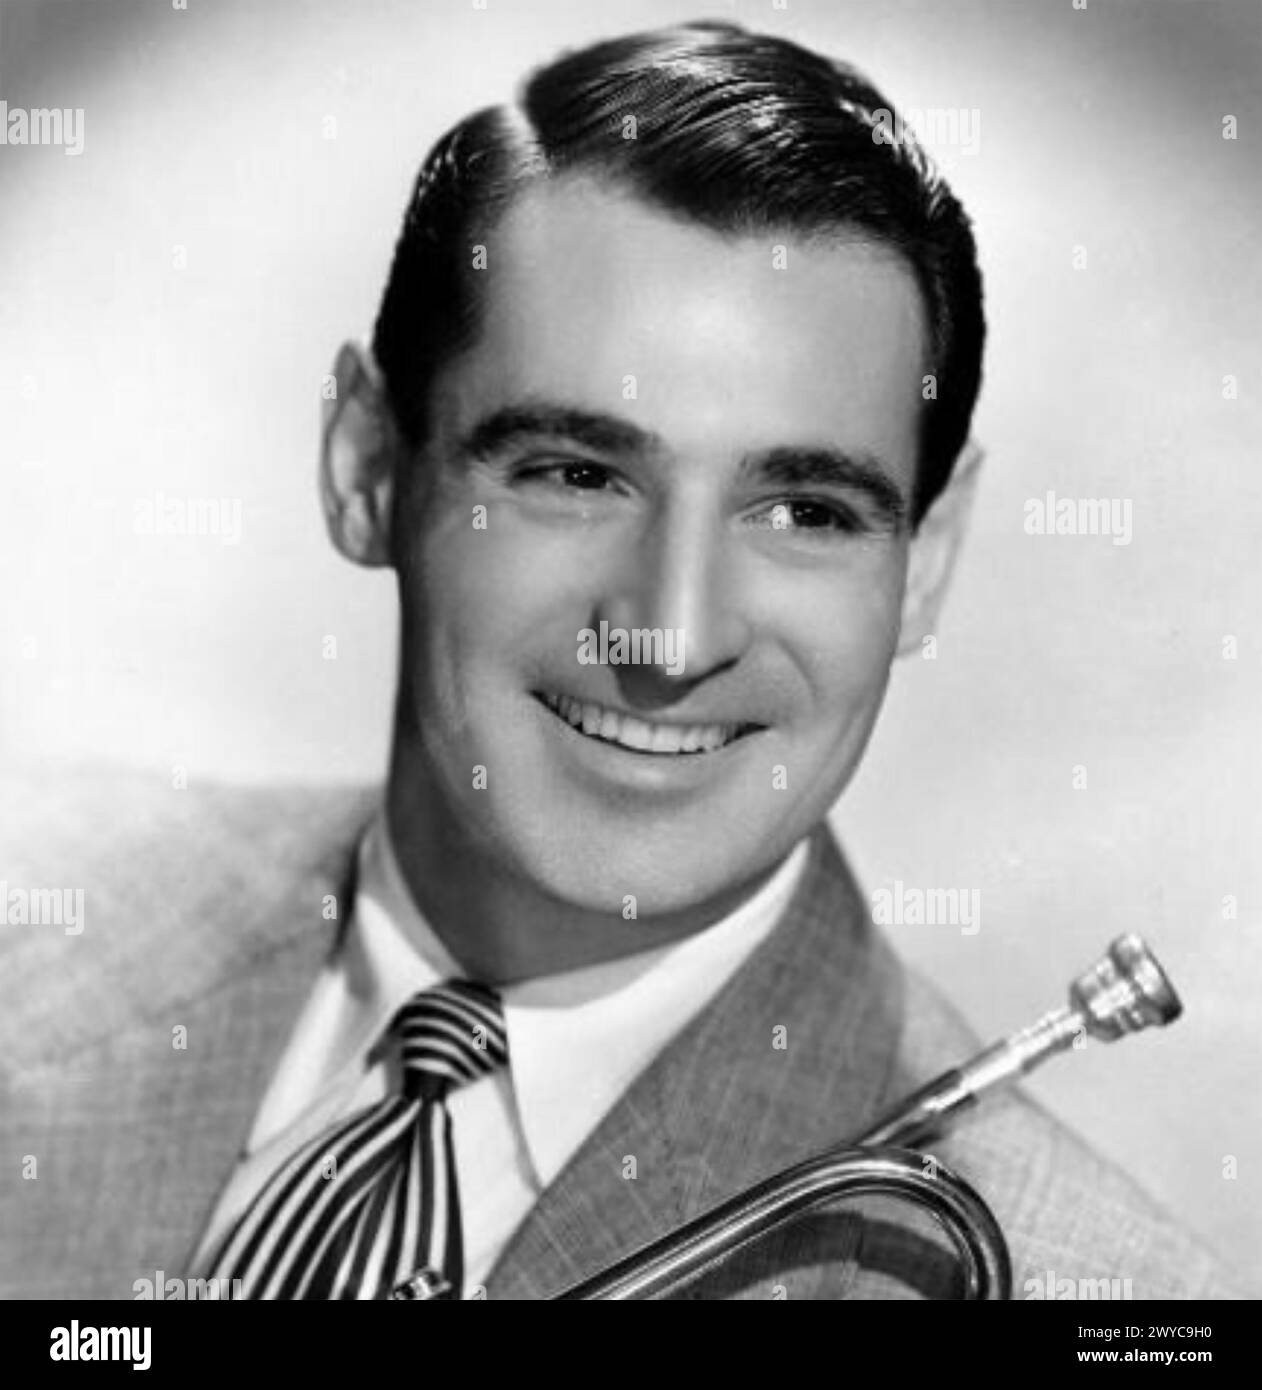 RAY ANTHONY  American bandleader  about 1950 Stock Photo